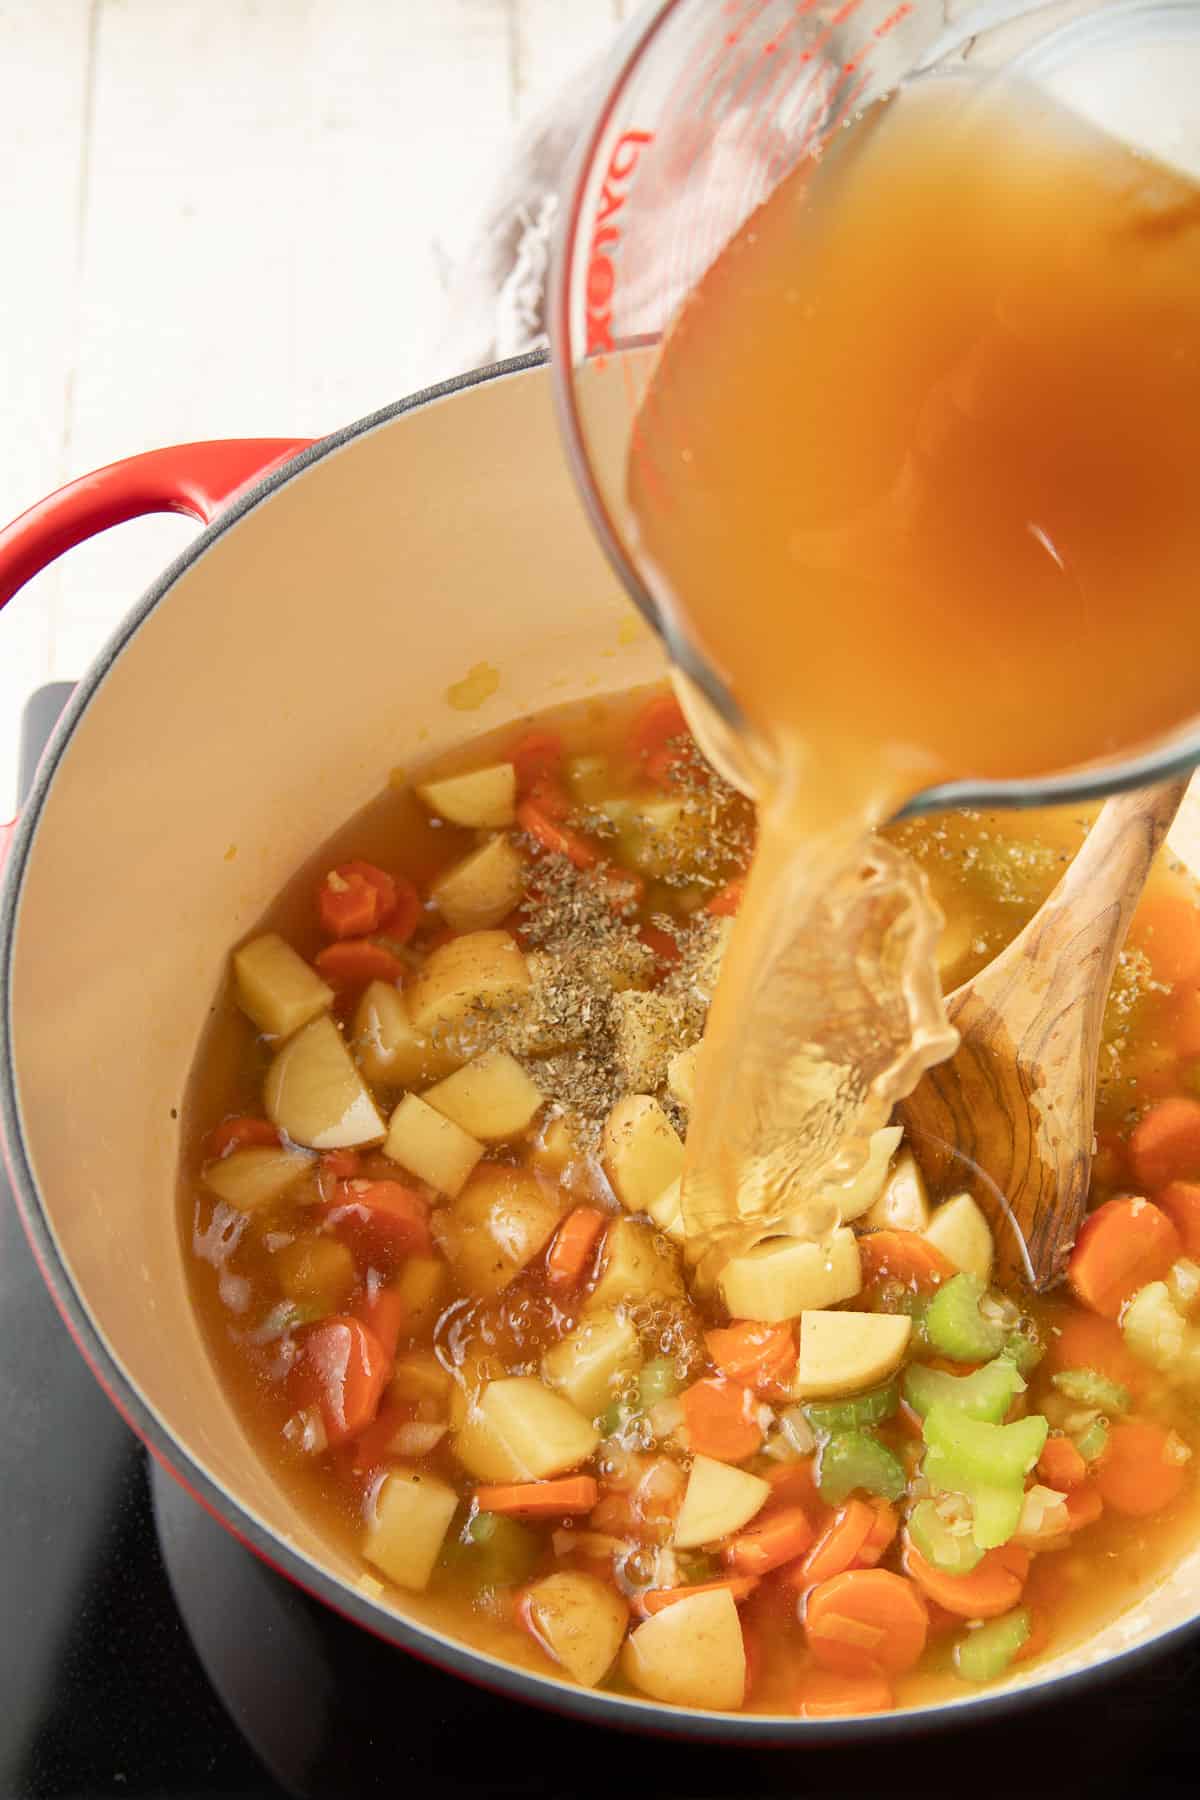 Broth being poured into a pot of vegetables.